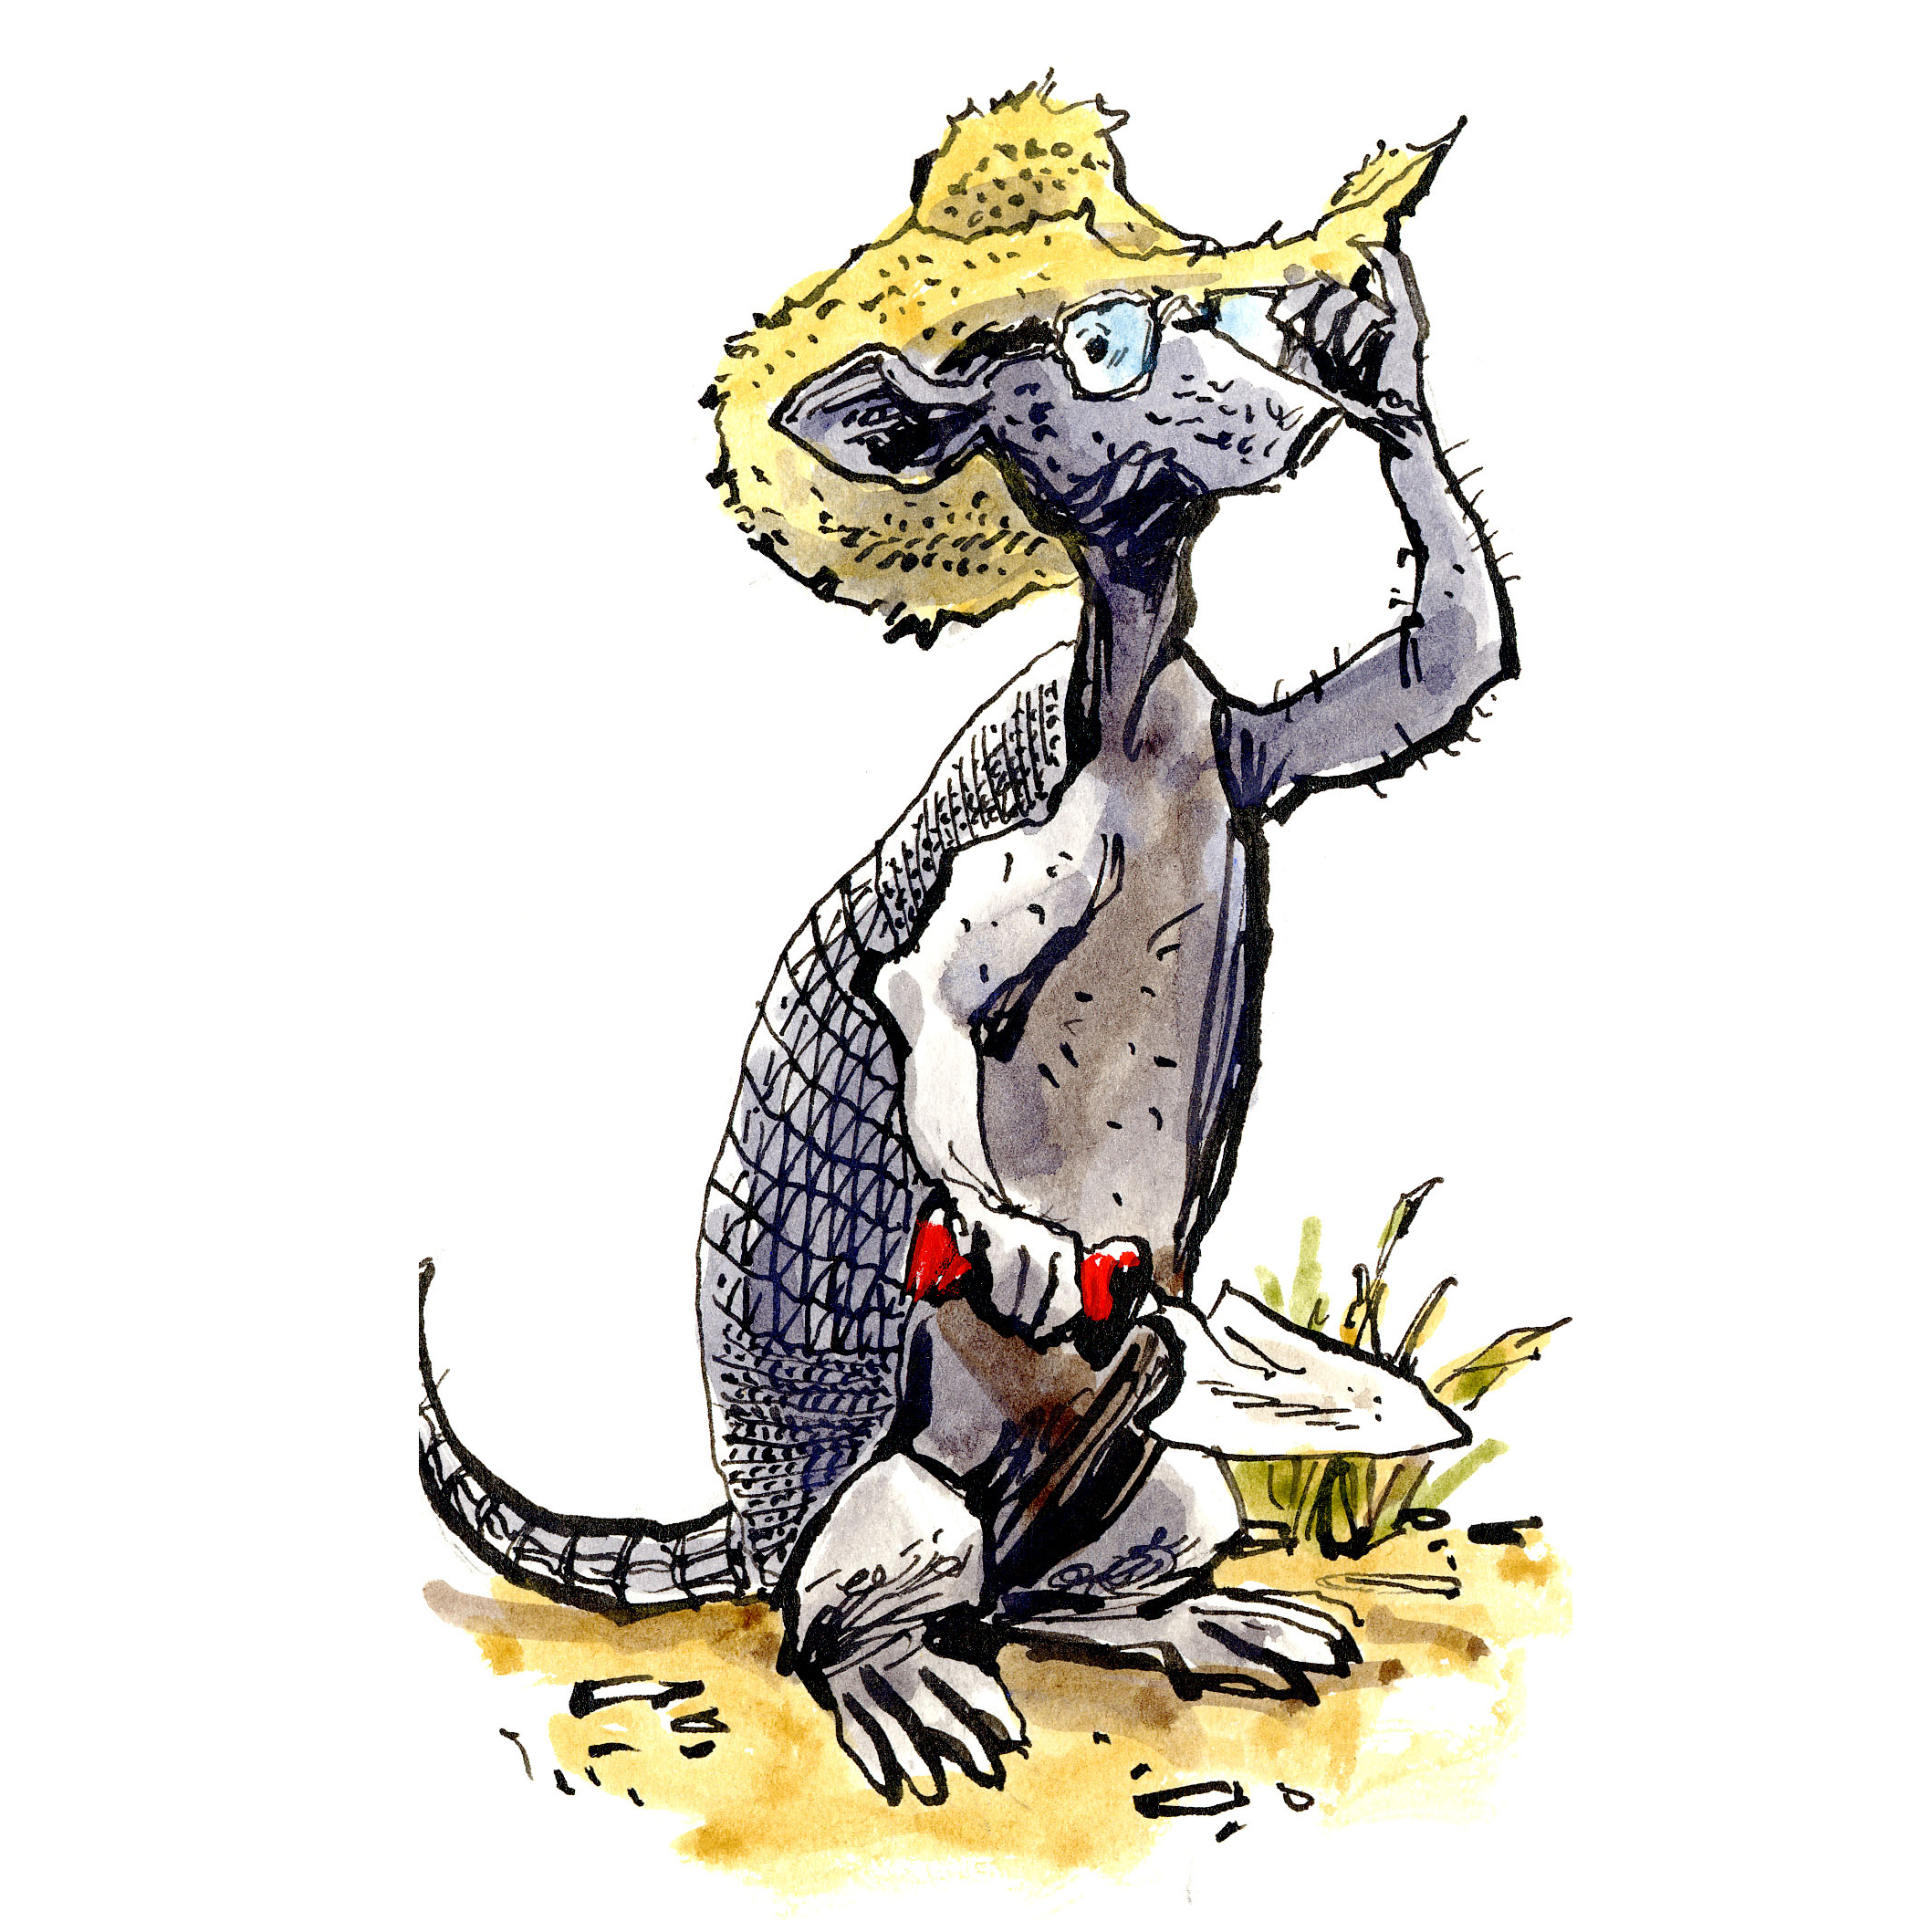 illustration of an armadillo wearing a straw hat and glasses holding a trowel